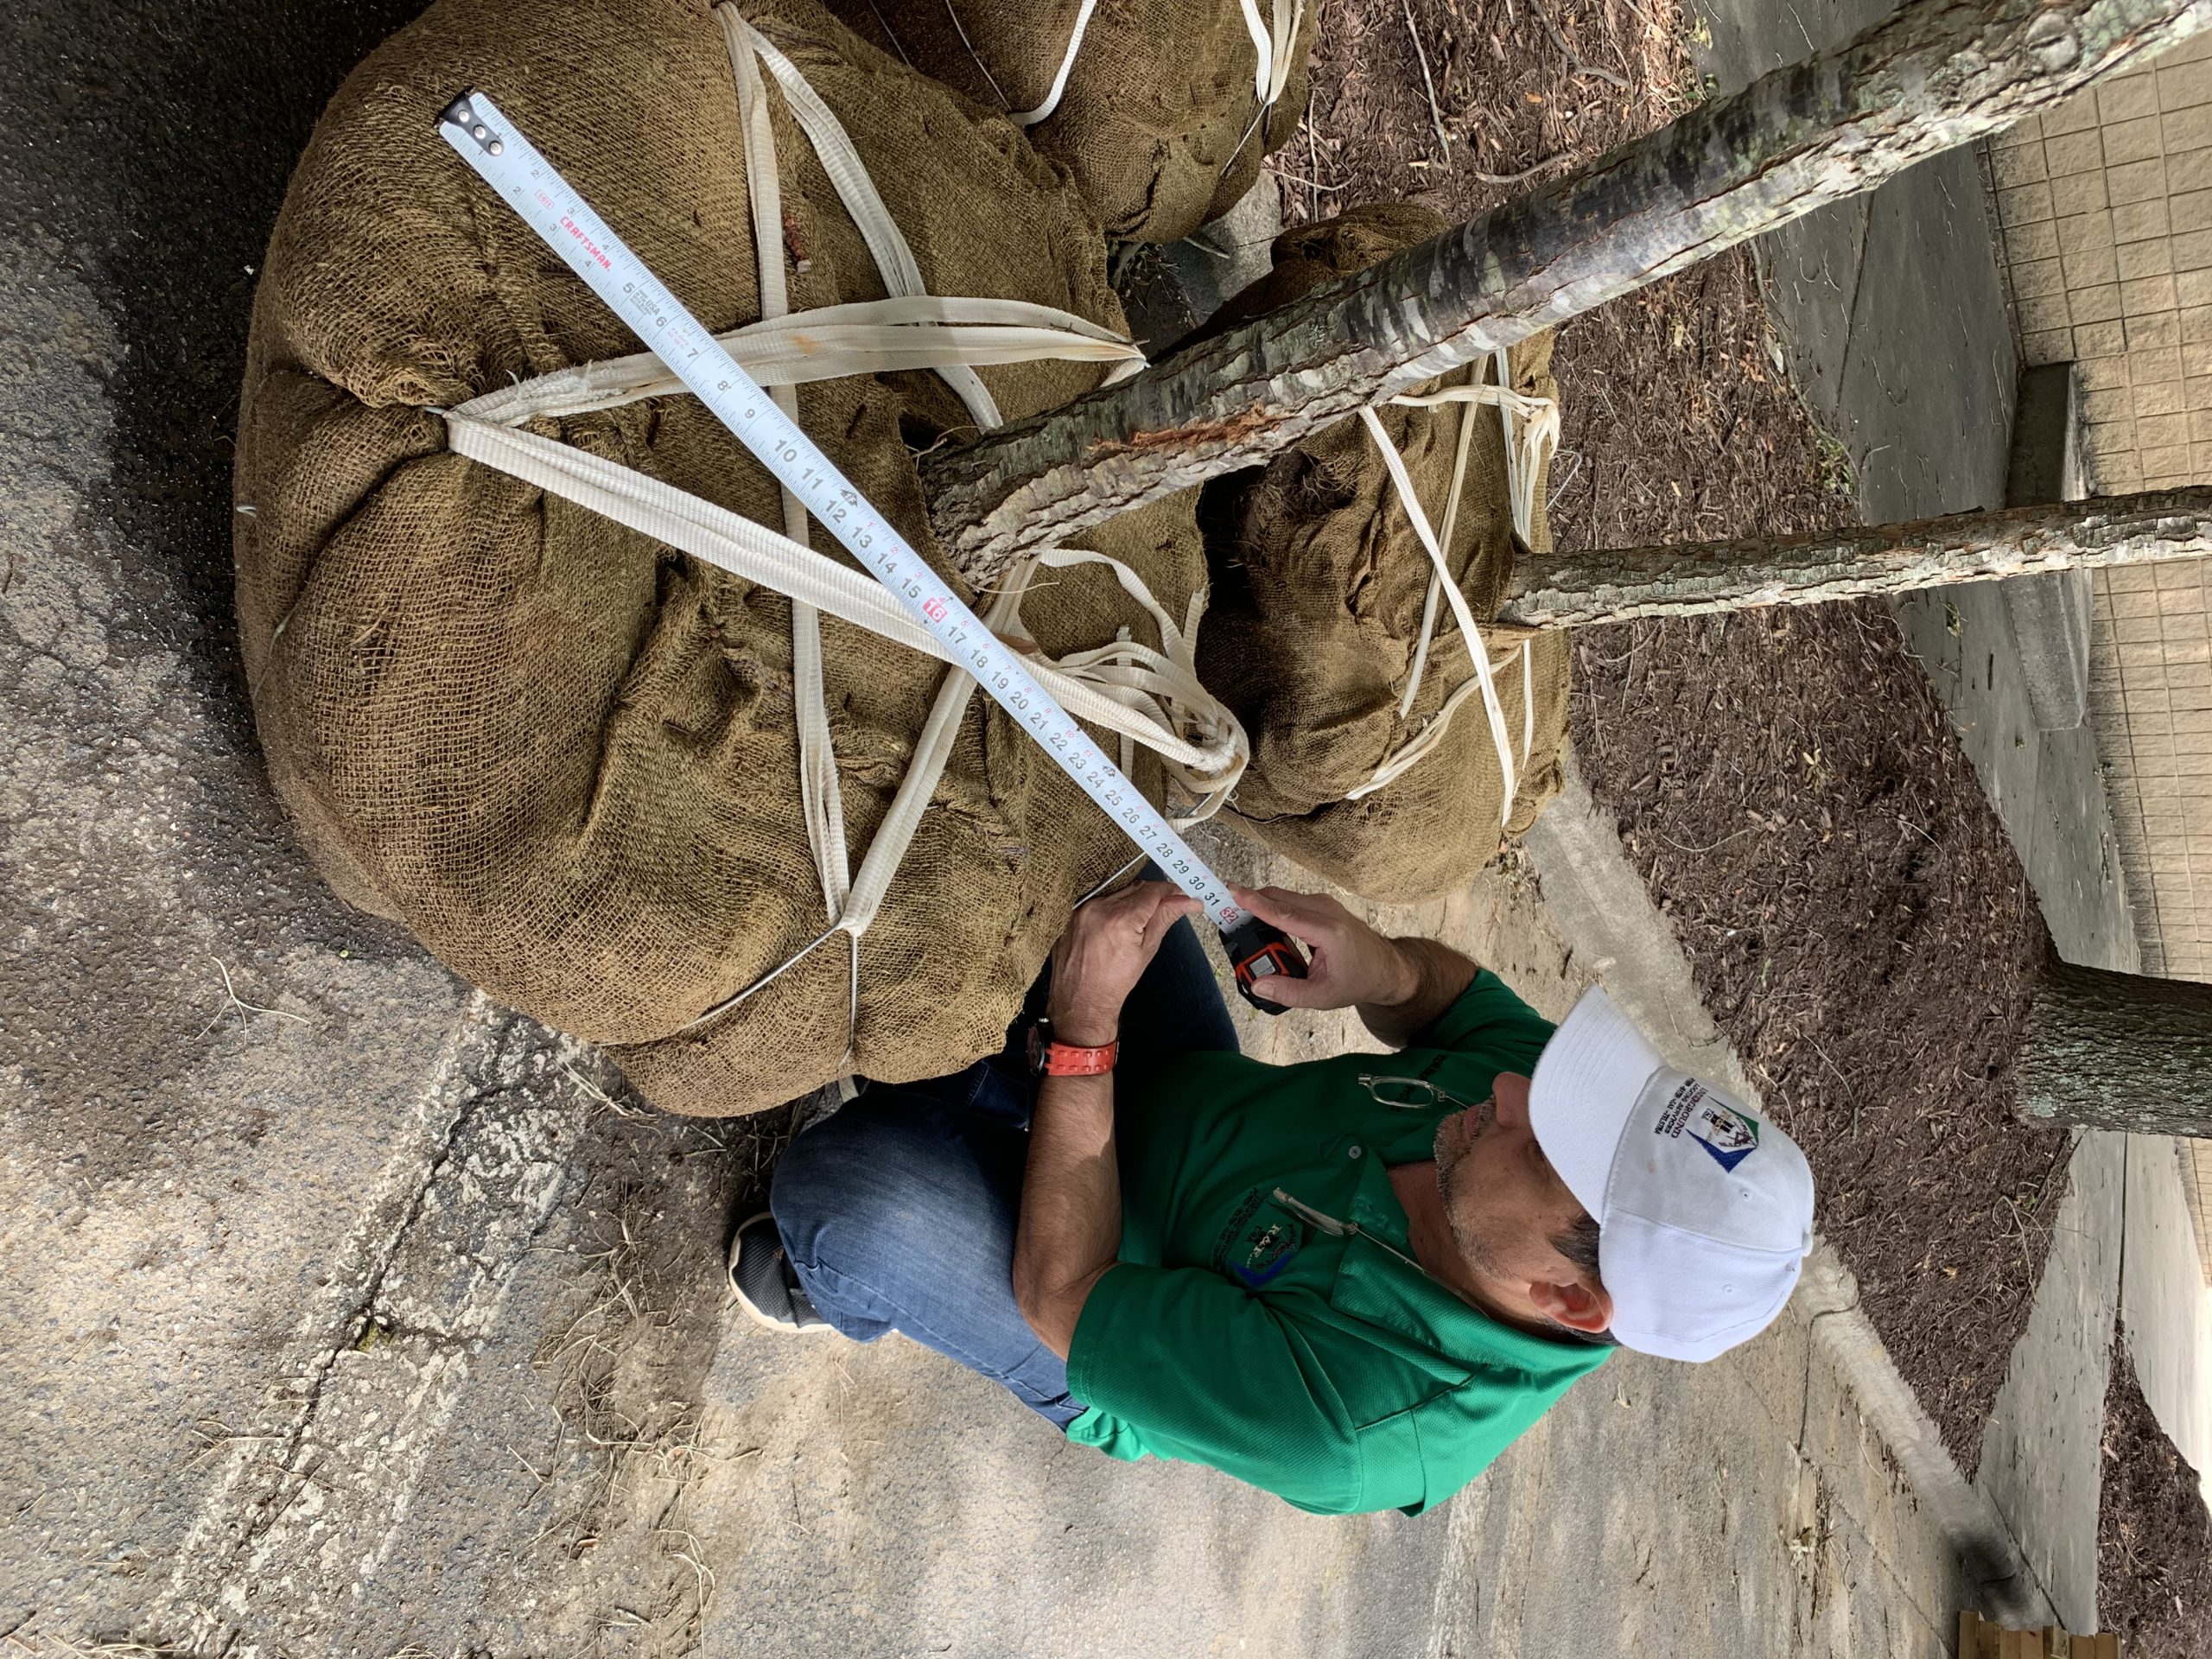 PROJECTSRFUSA. Image 2. Measurement of tree roots (PROJECTS RF USA - AGO2019)